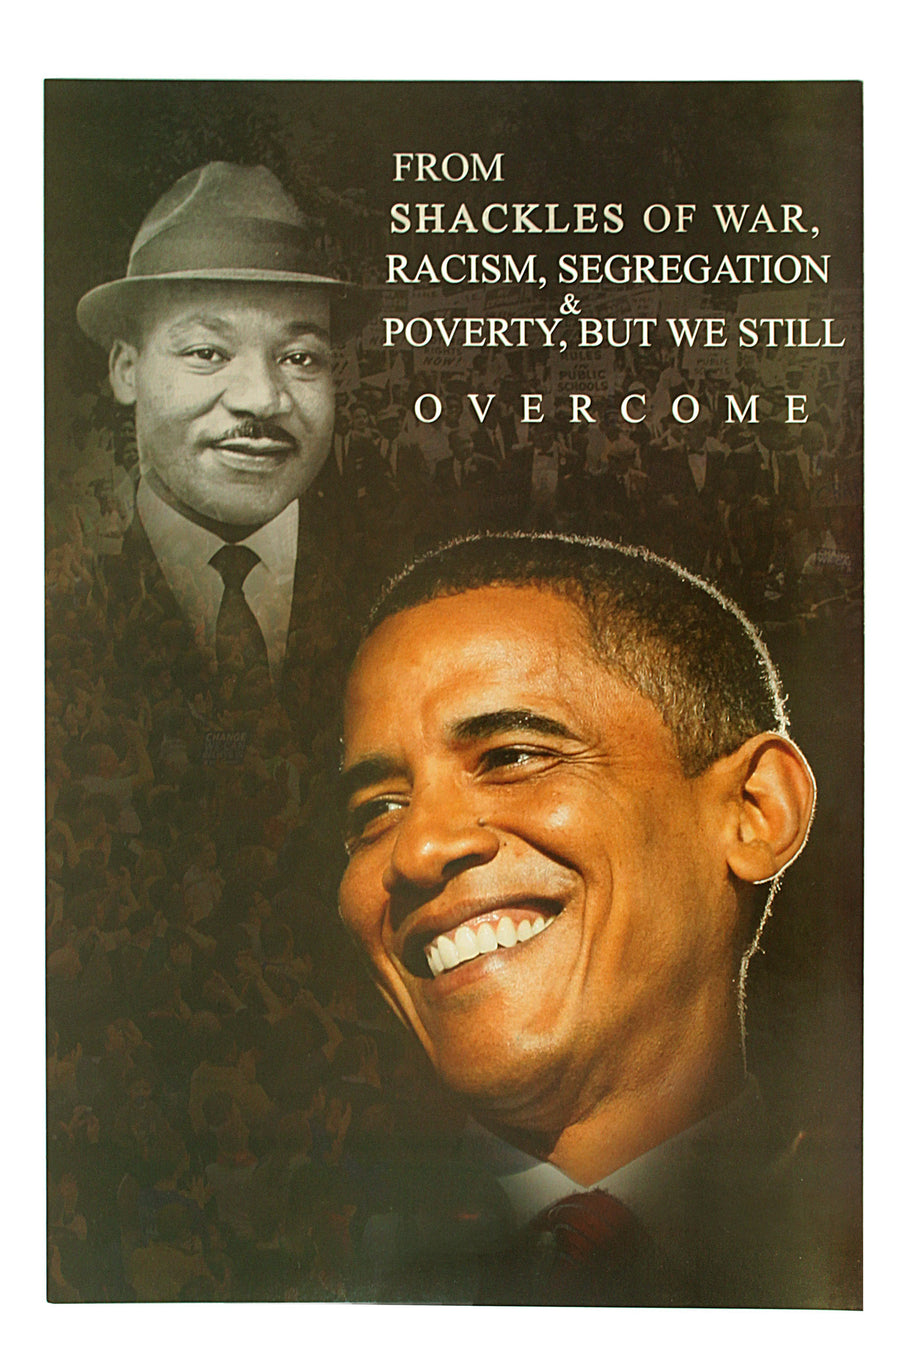 But Still We Overcome: Martin Luther King Jr. and Barack Obama